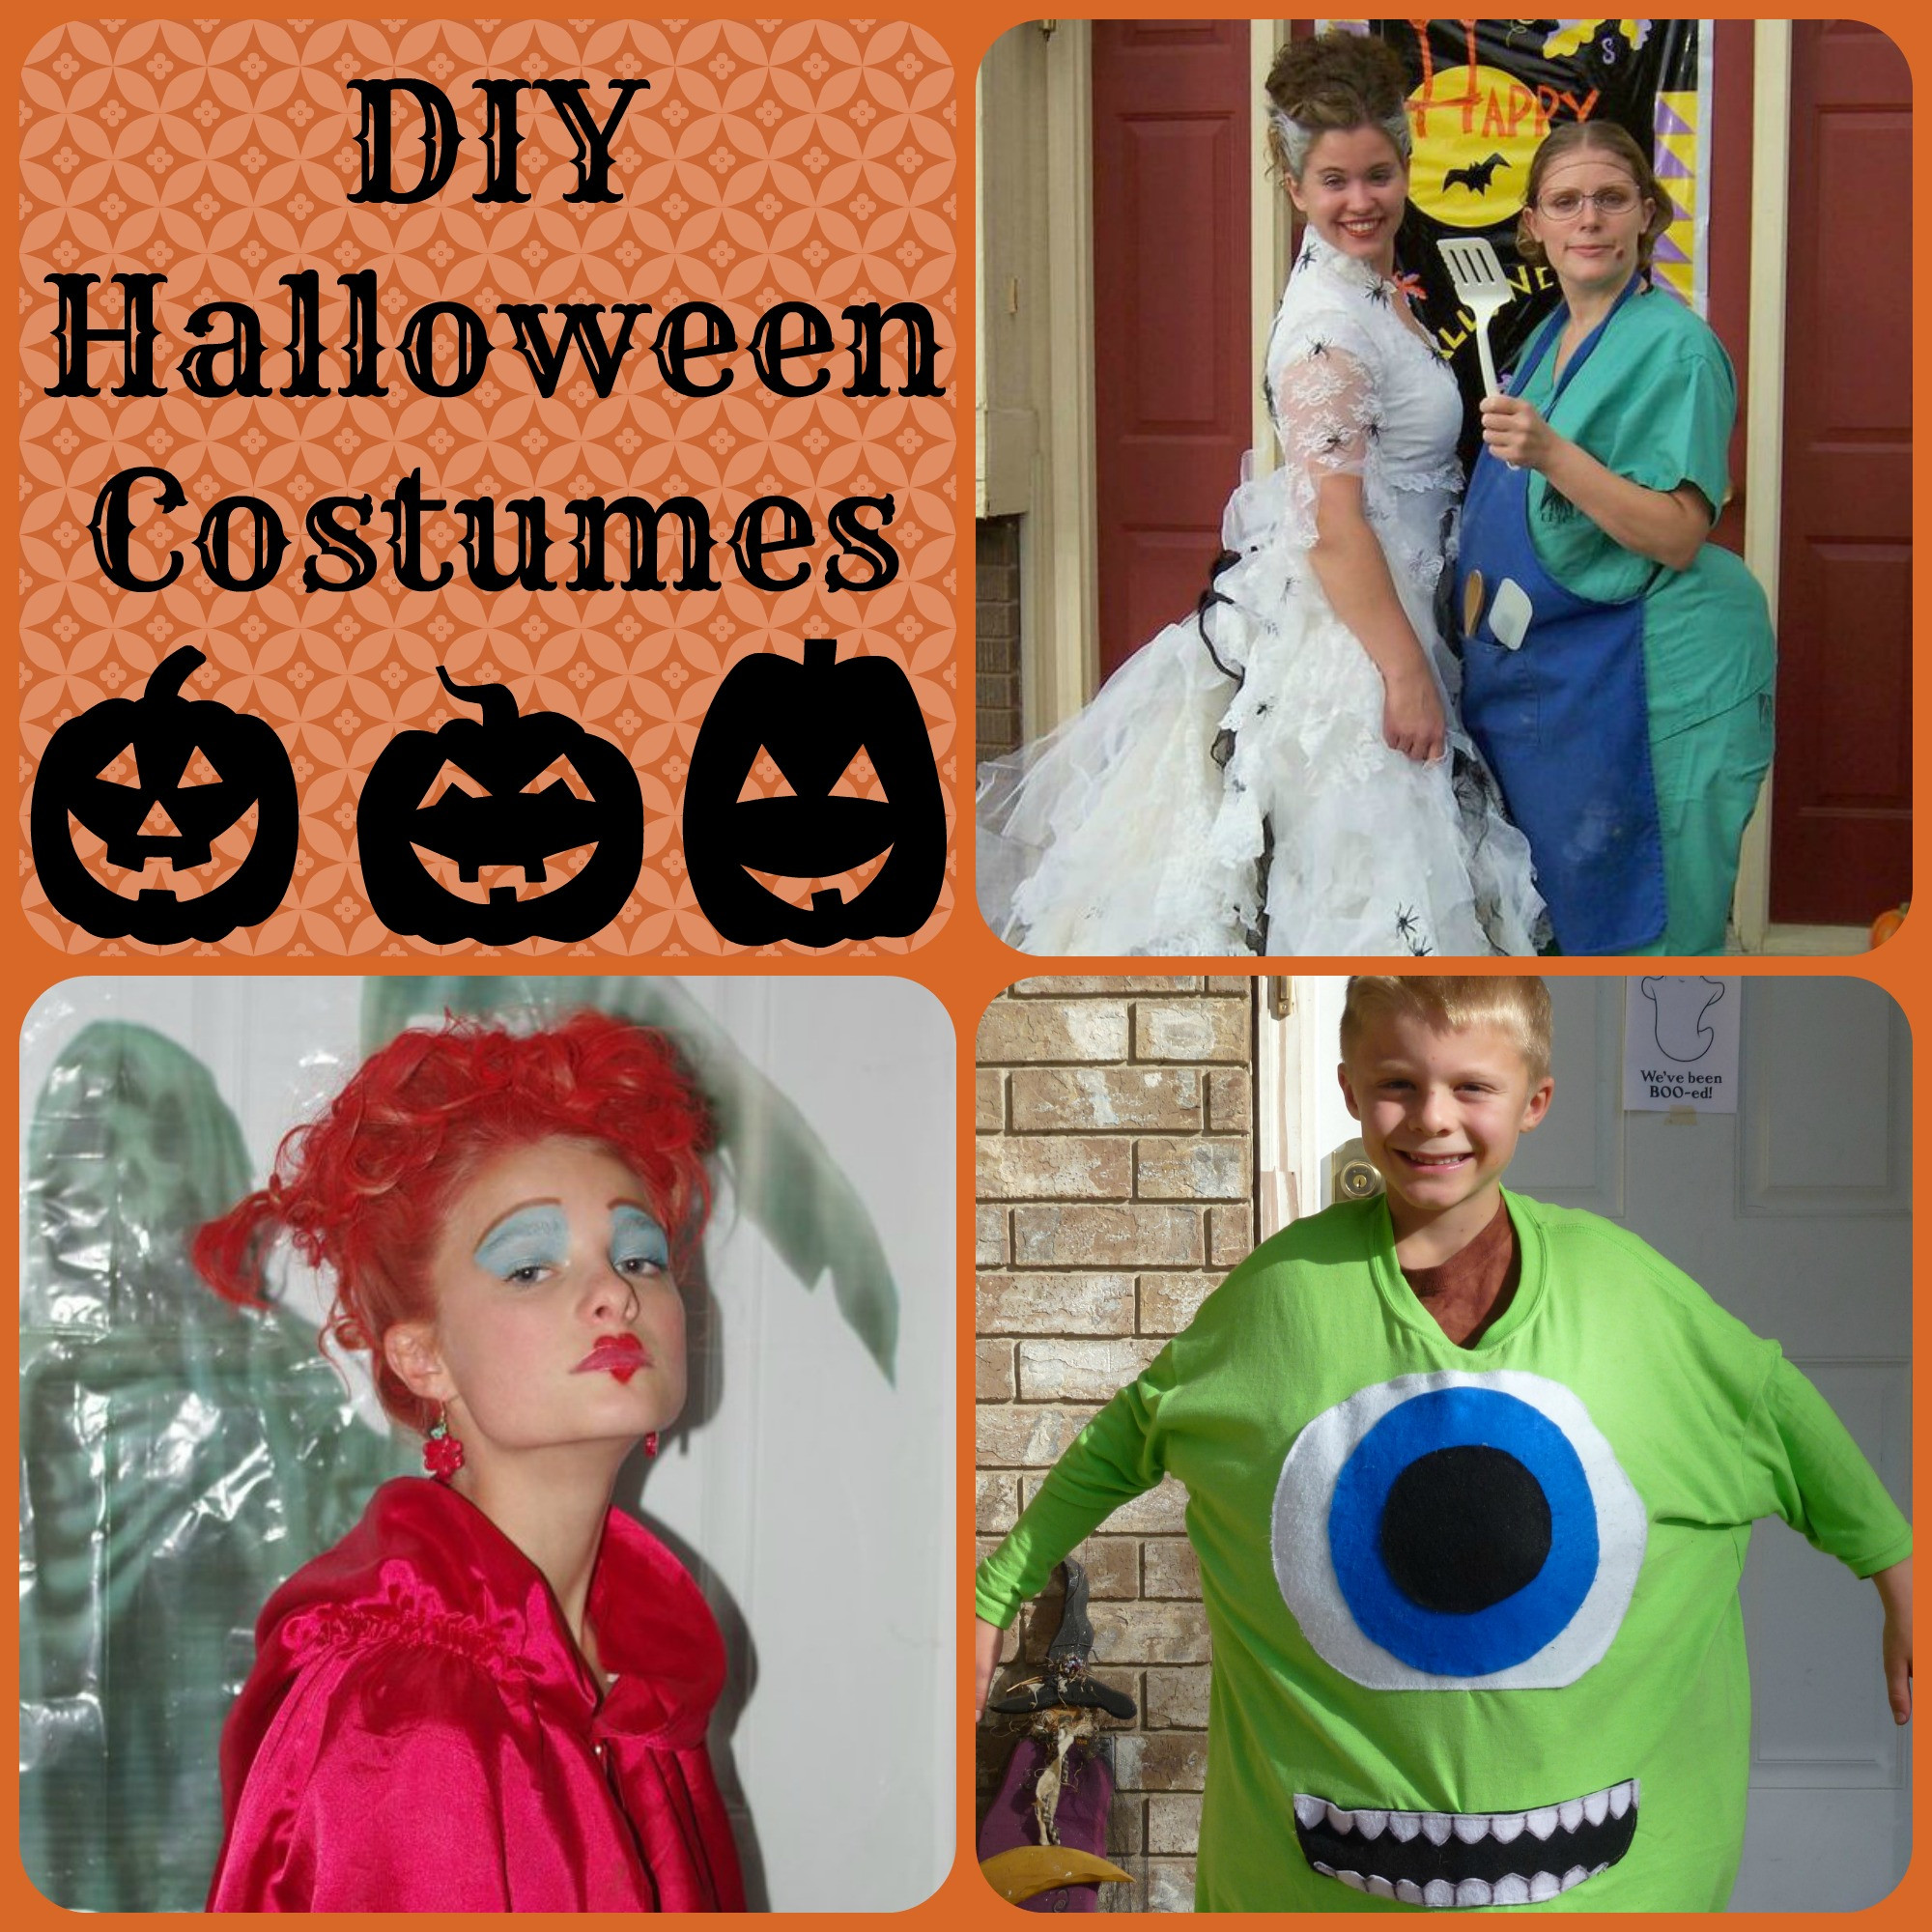 Creative DIY Costumes
 Top Posts in 2013 events to CELEBRATE